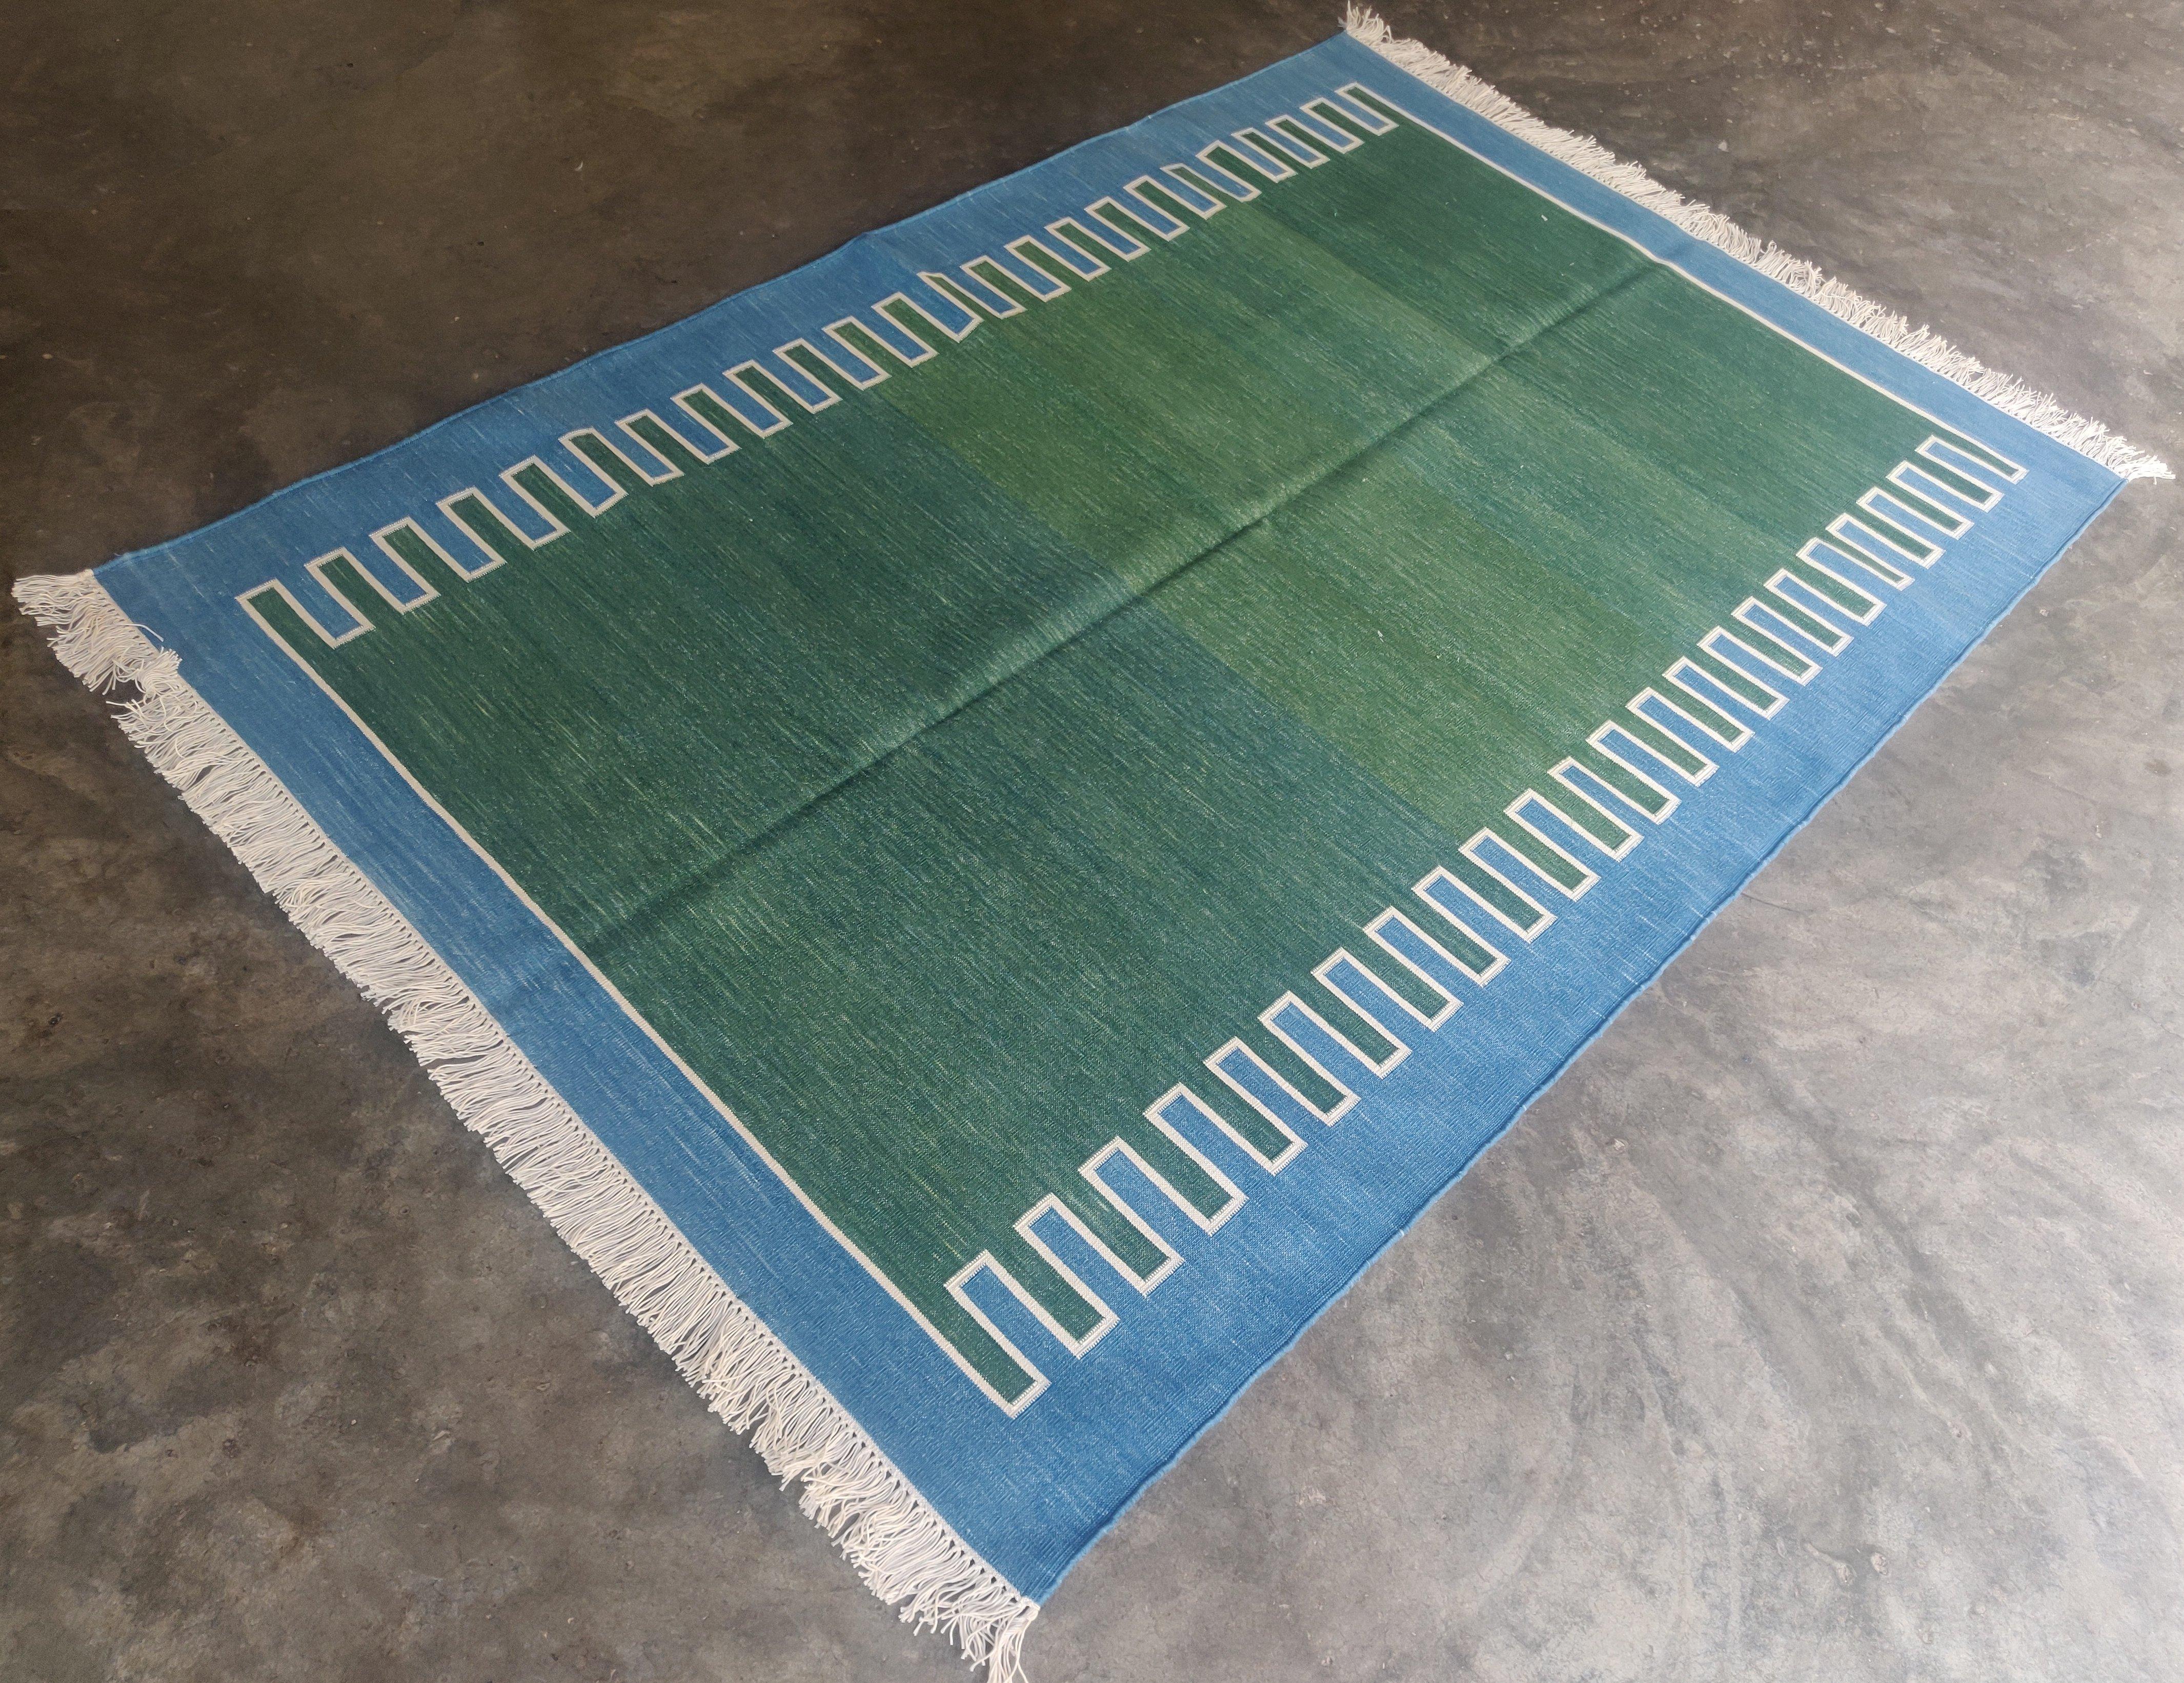 Cotton Natural Vegetable Dyed, Forest Green, Cream & Blue Zig Zag Striped Indian Rug - 4'x6'
These special flat-weave dhurries are hand-woven with 15 ply 100% cotton yarn. Due to the special manufacturing techniques used to create our rugs, the size